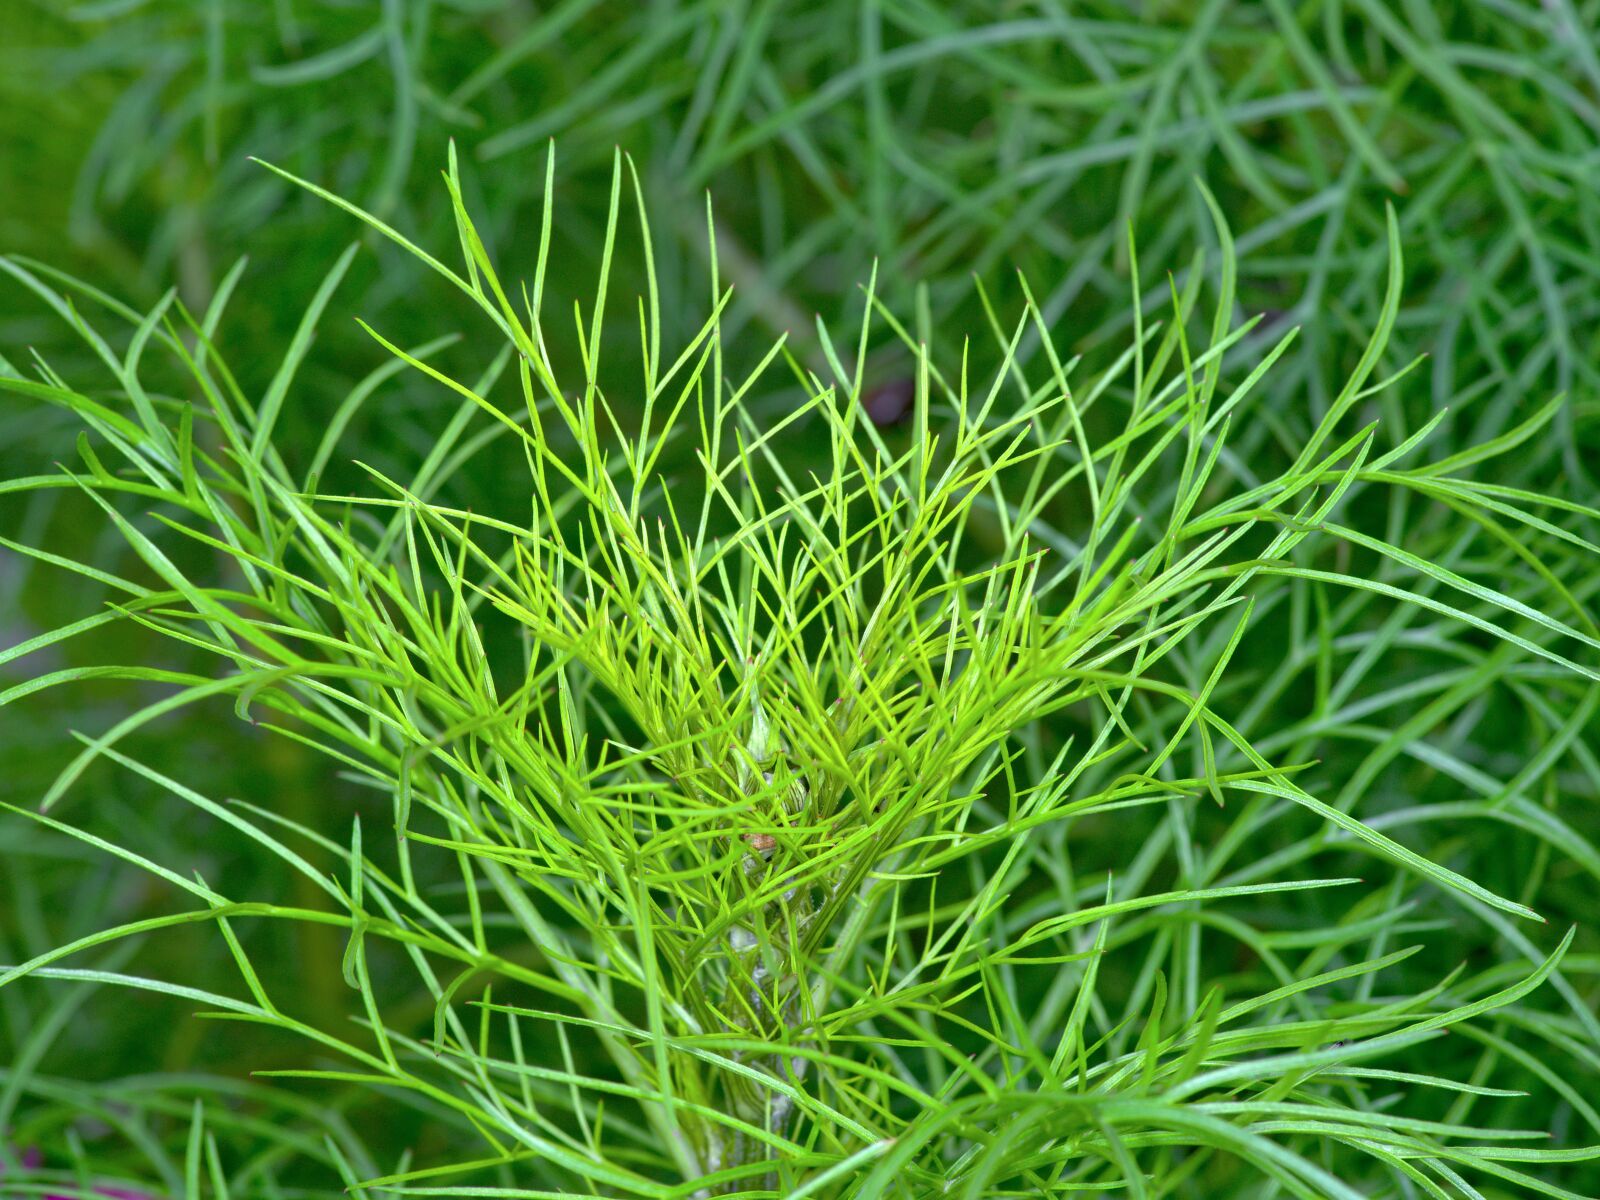 Pentax KP sample photo. Dill, dill weed, leaves photography